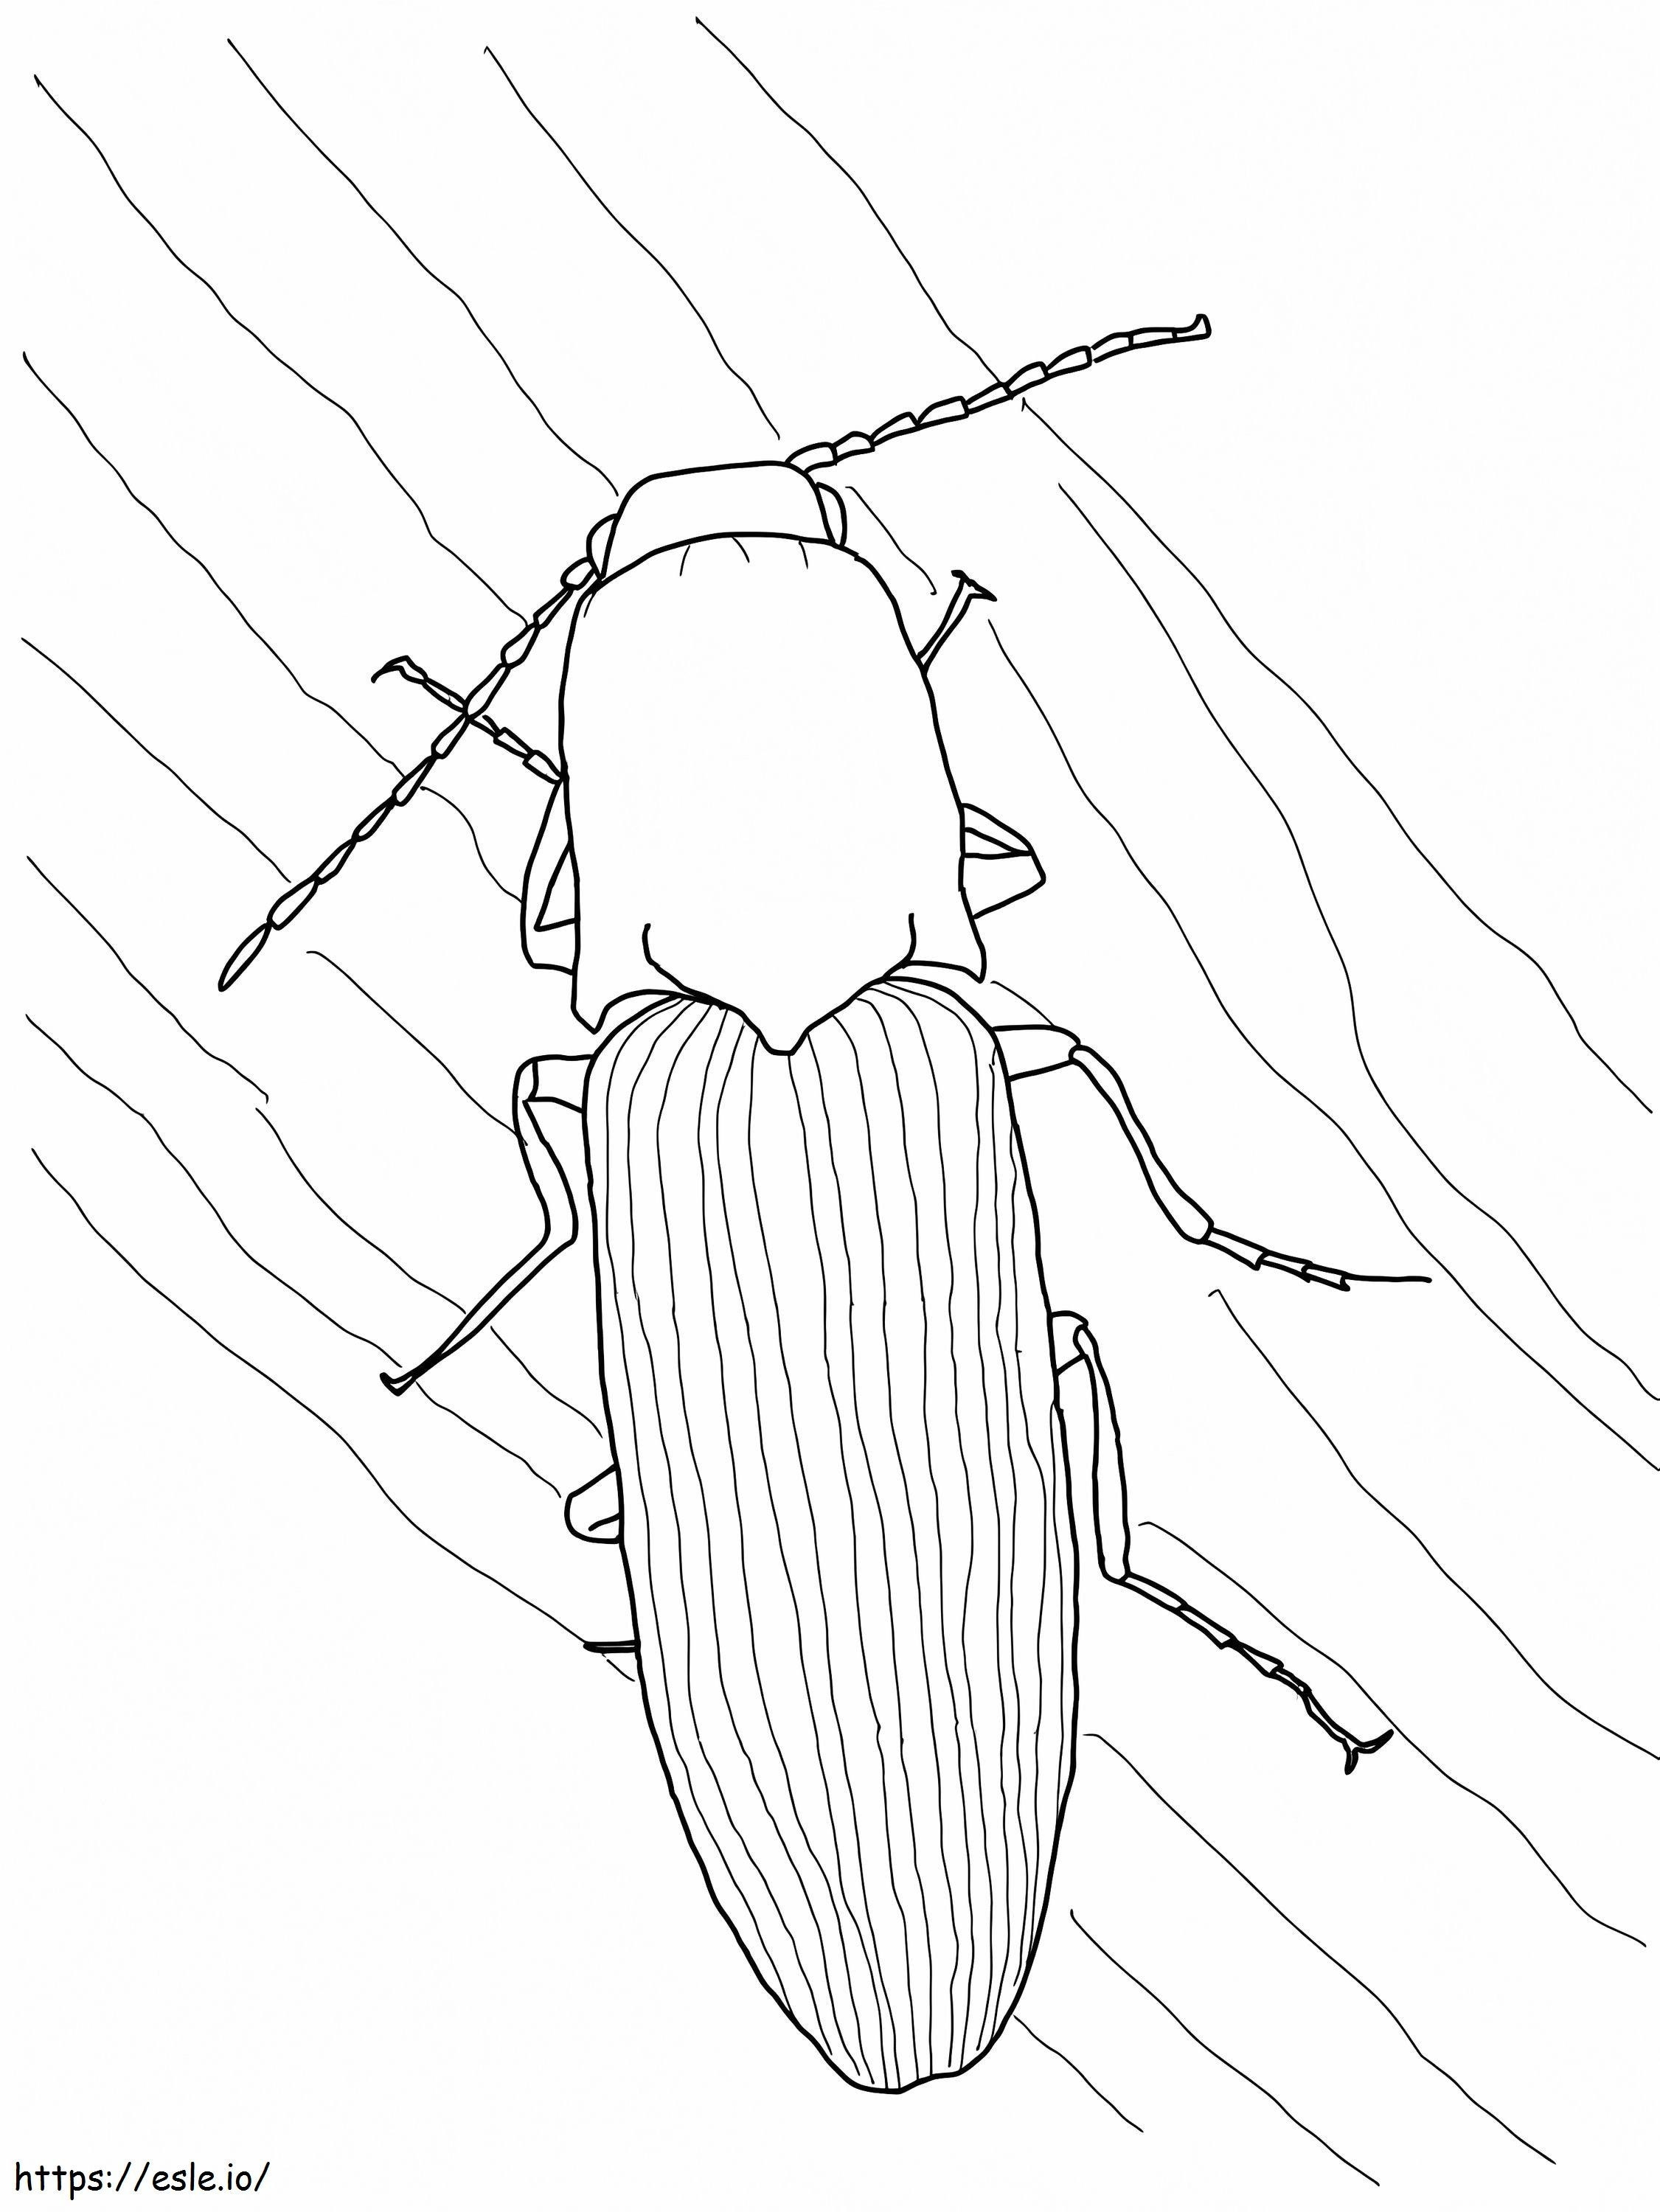 Click Beetle coloring page